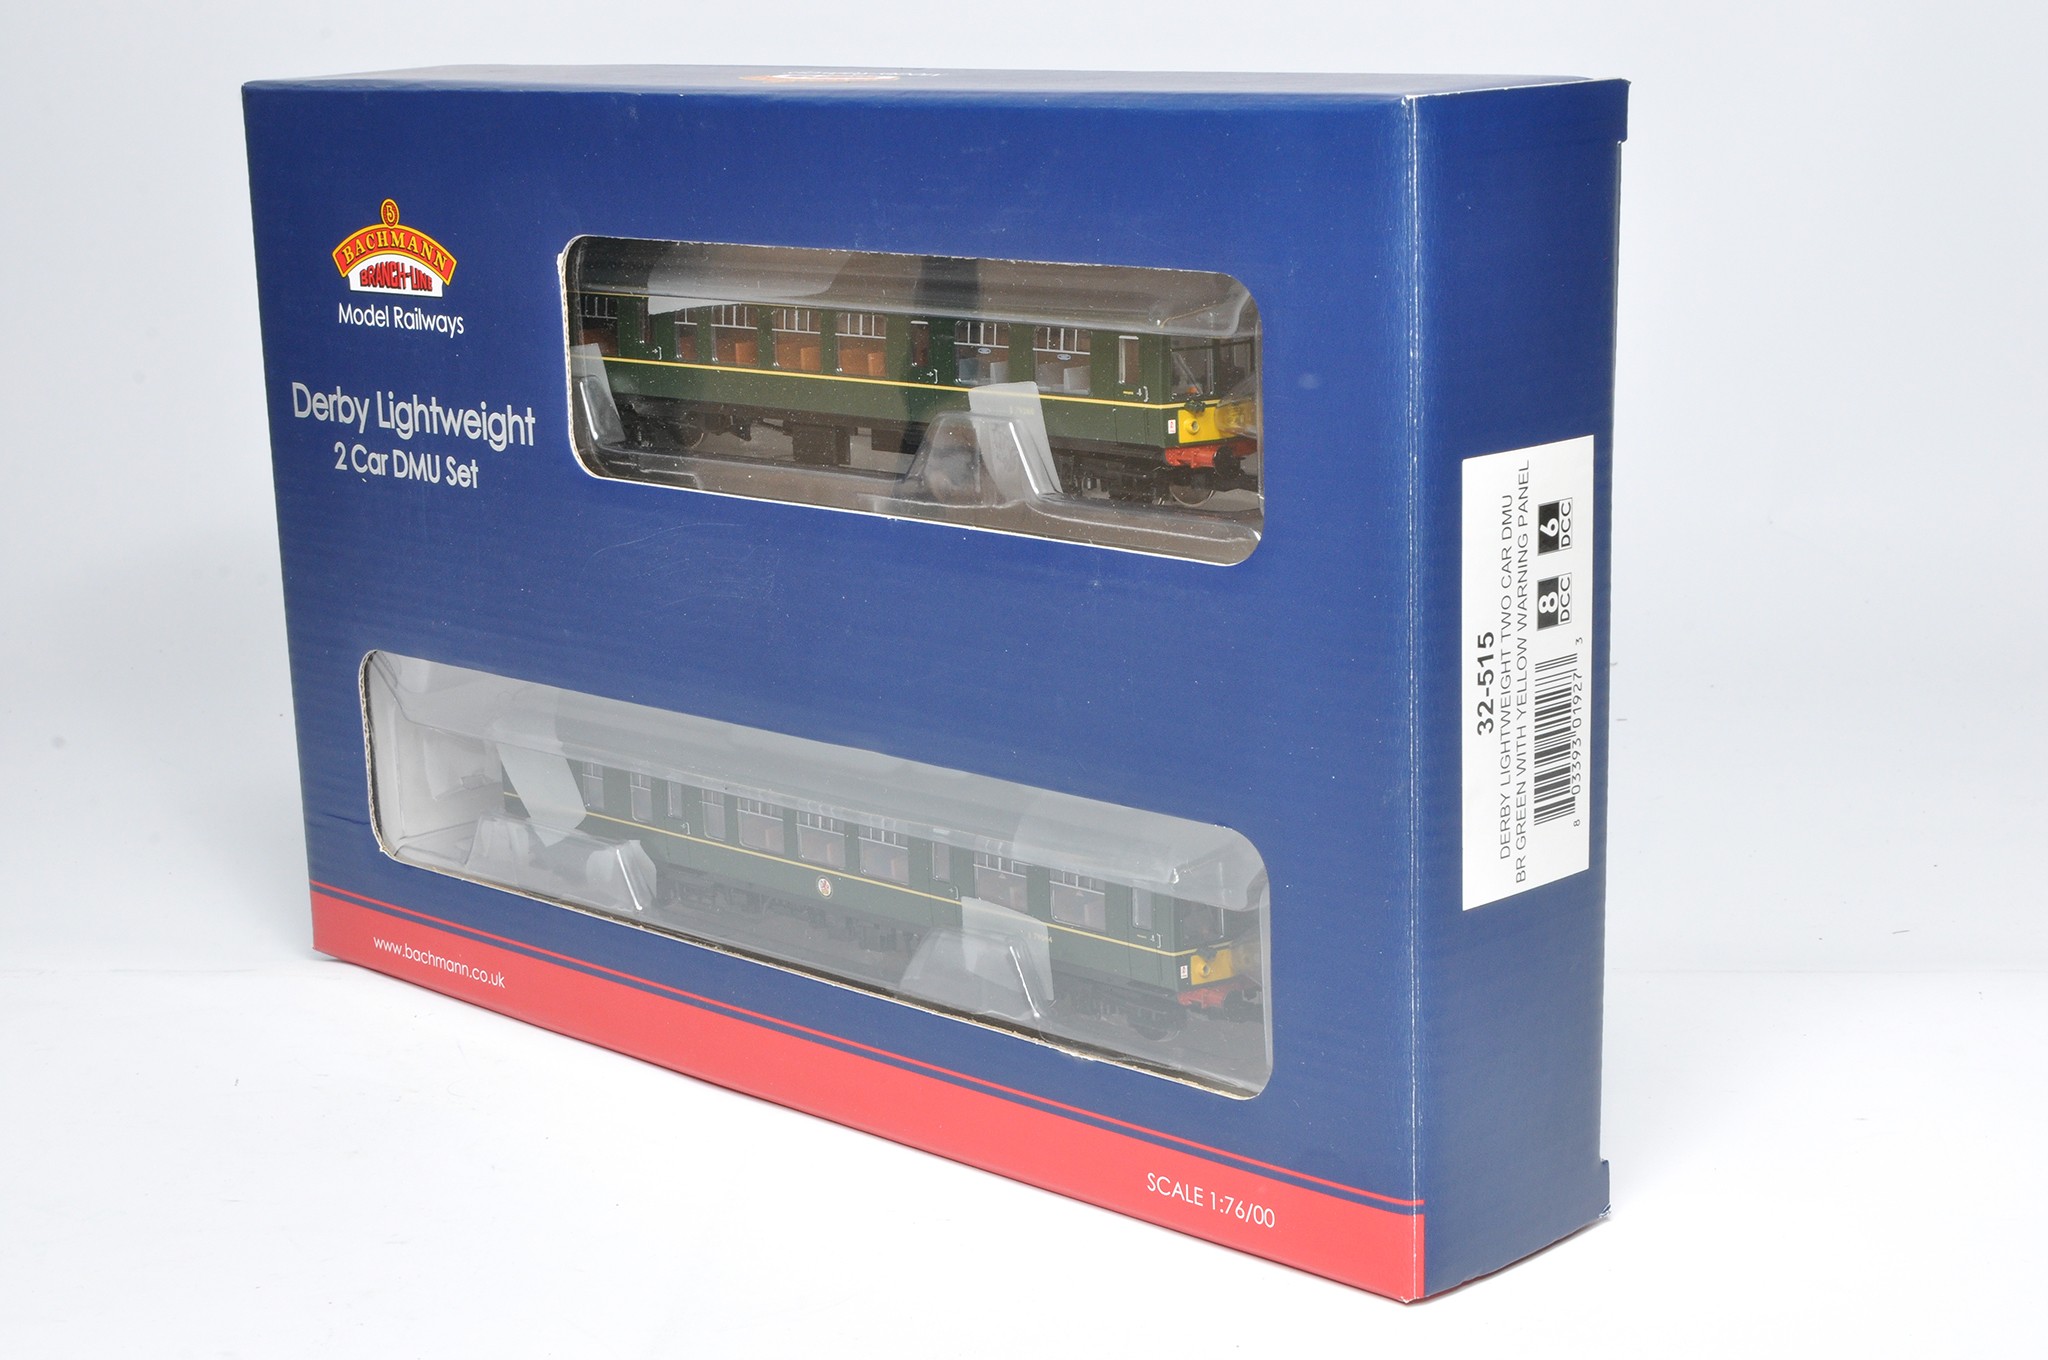 Bachmann Model Railway comprising locomotive issue No. 32-515 Derby Two Car DMU Set. Looks to be